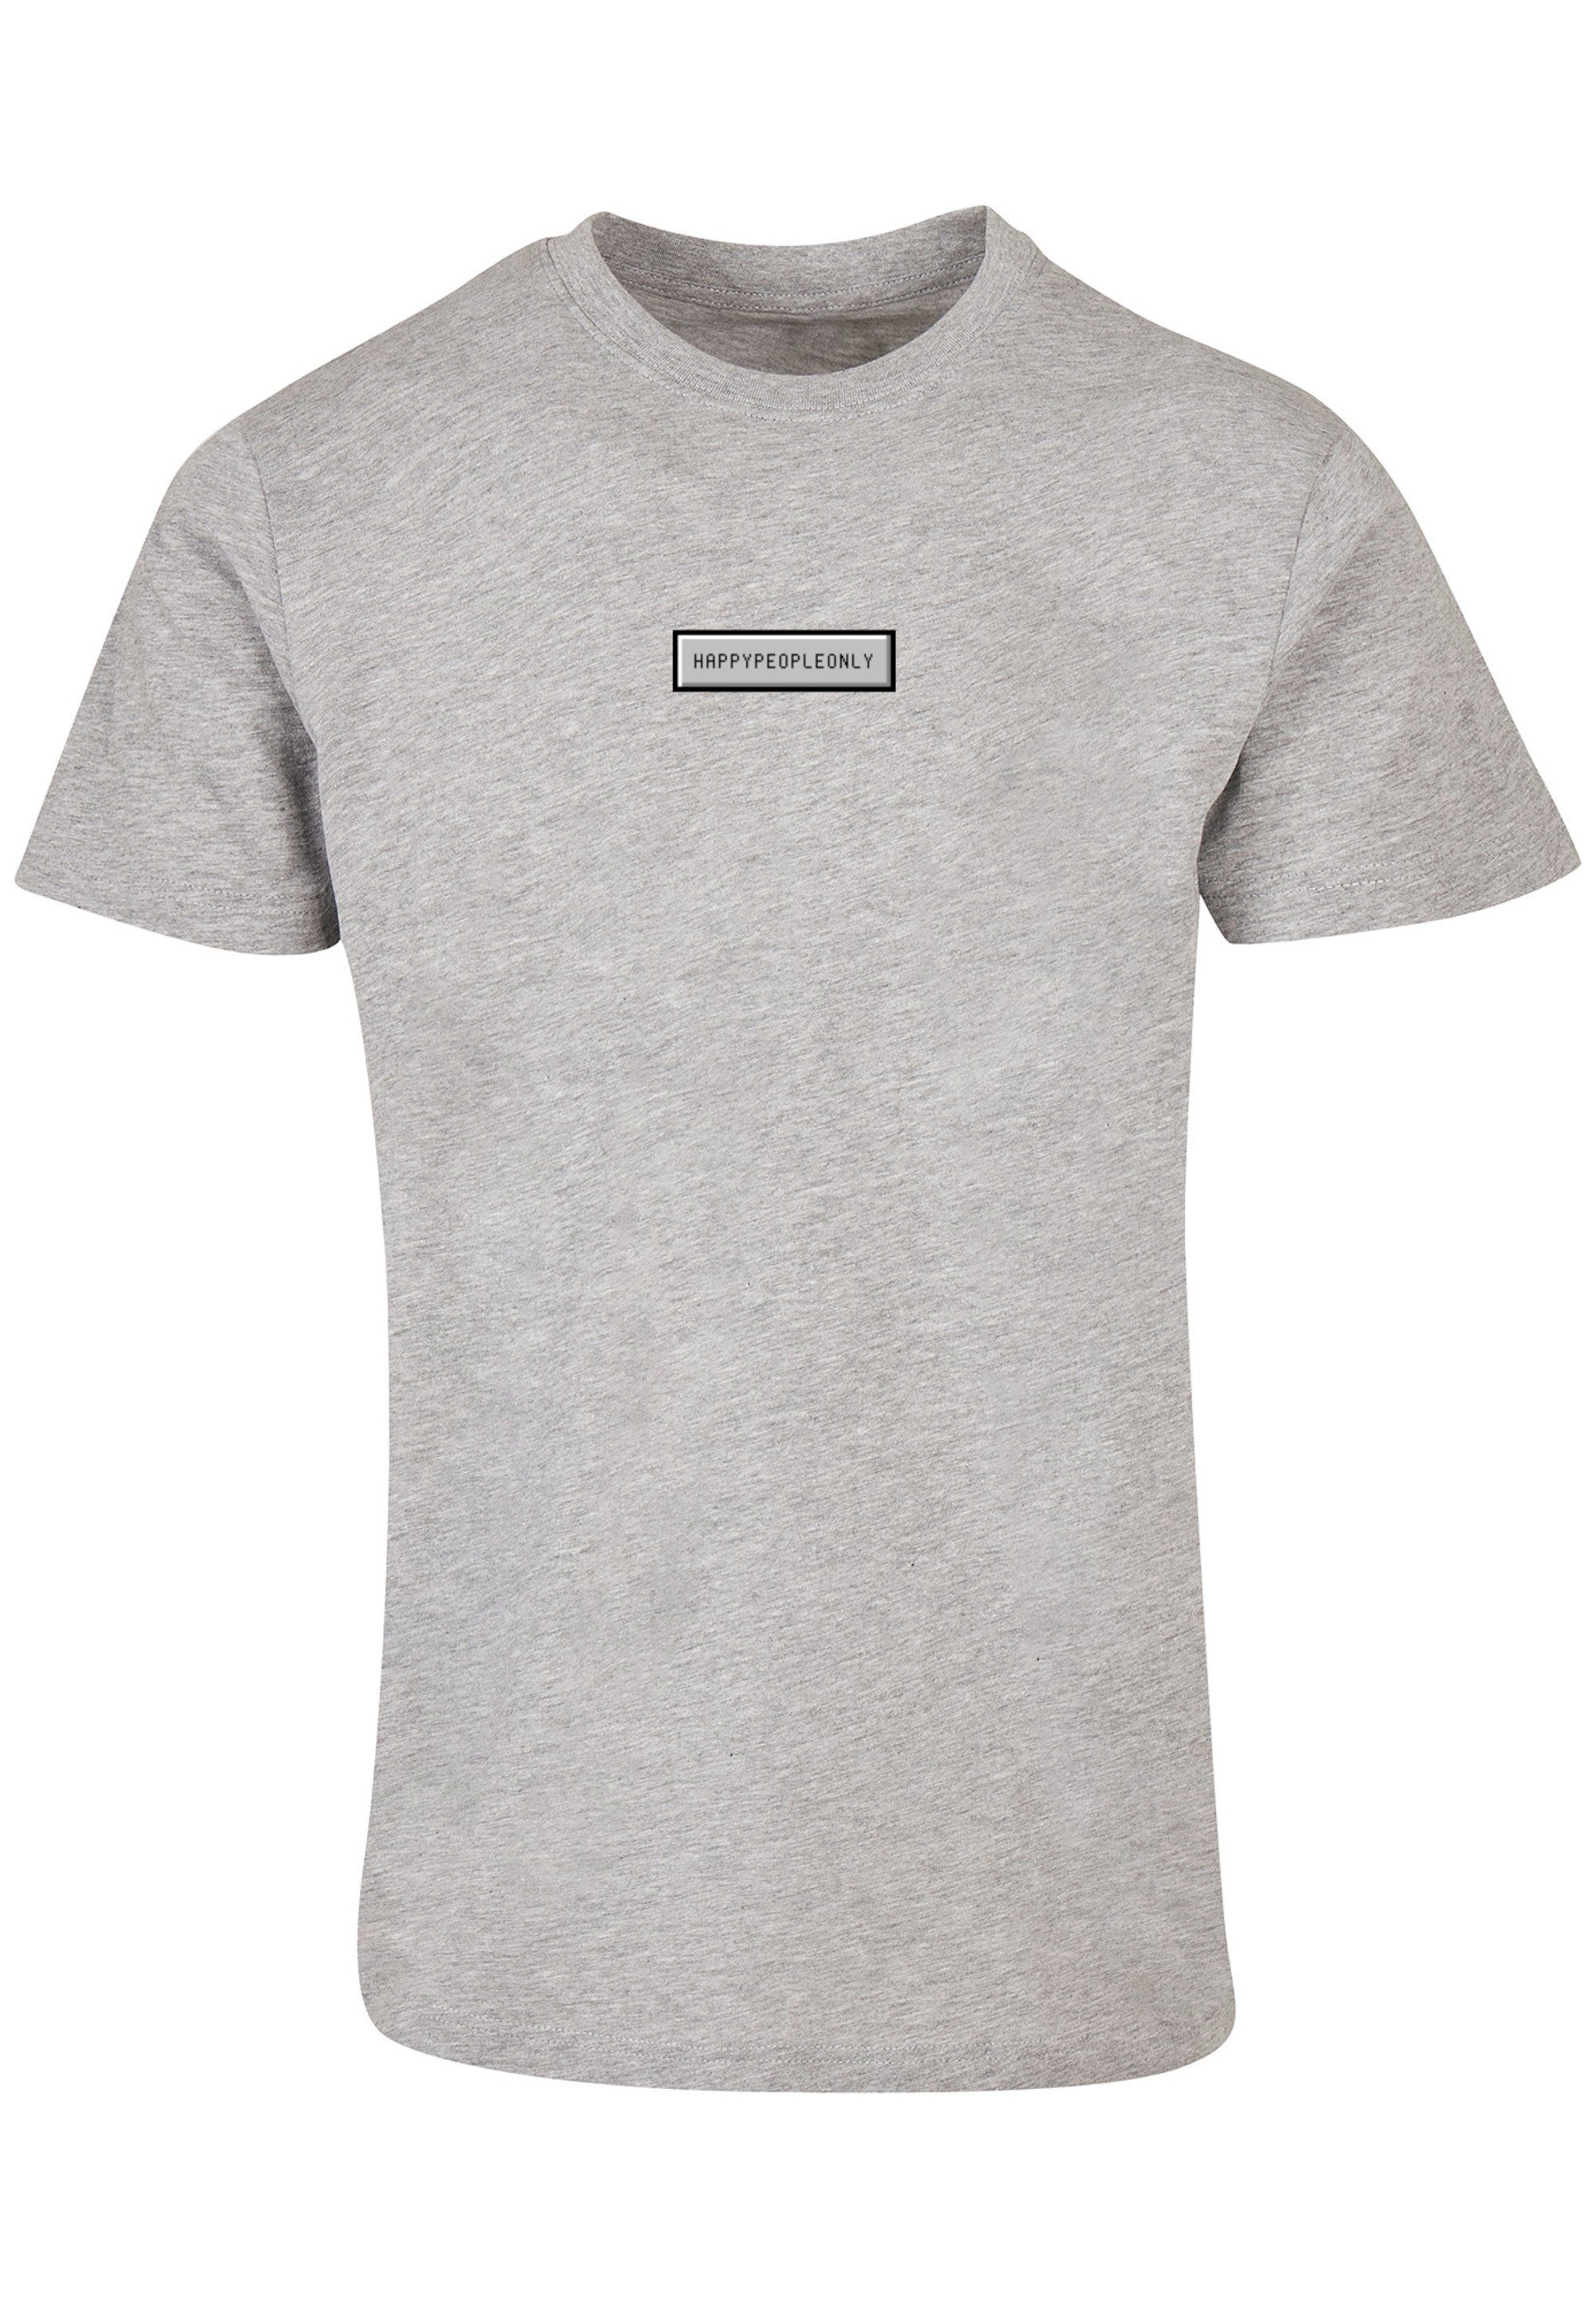 F4NT4STIC T-Shirt Happy grey Only heather Good Print Vibes People